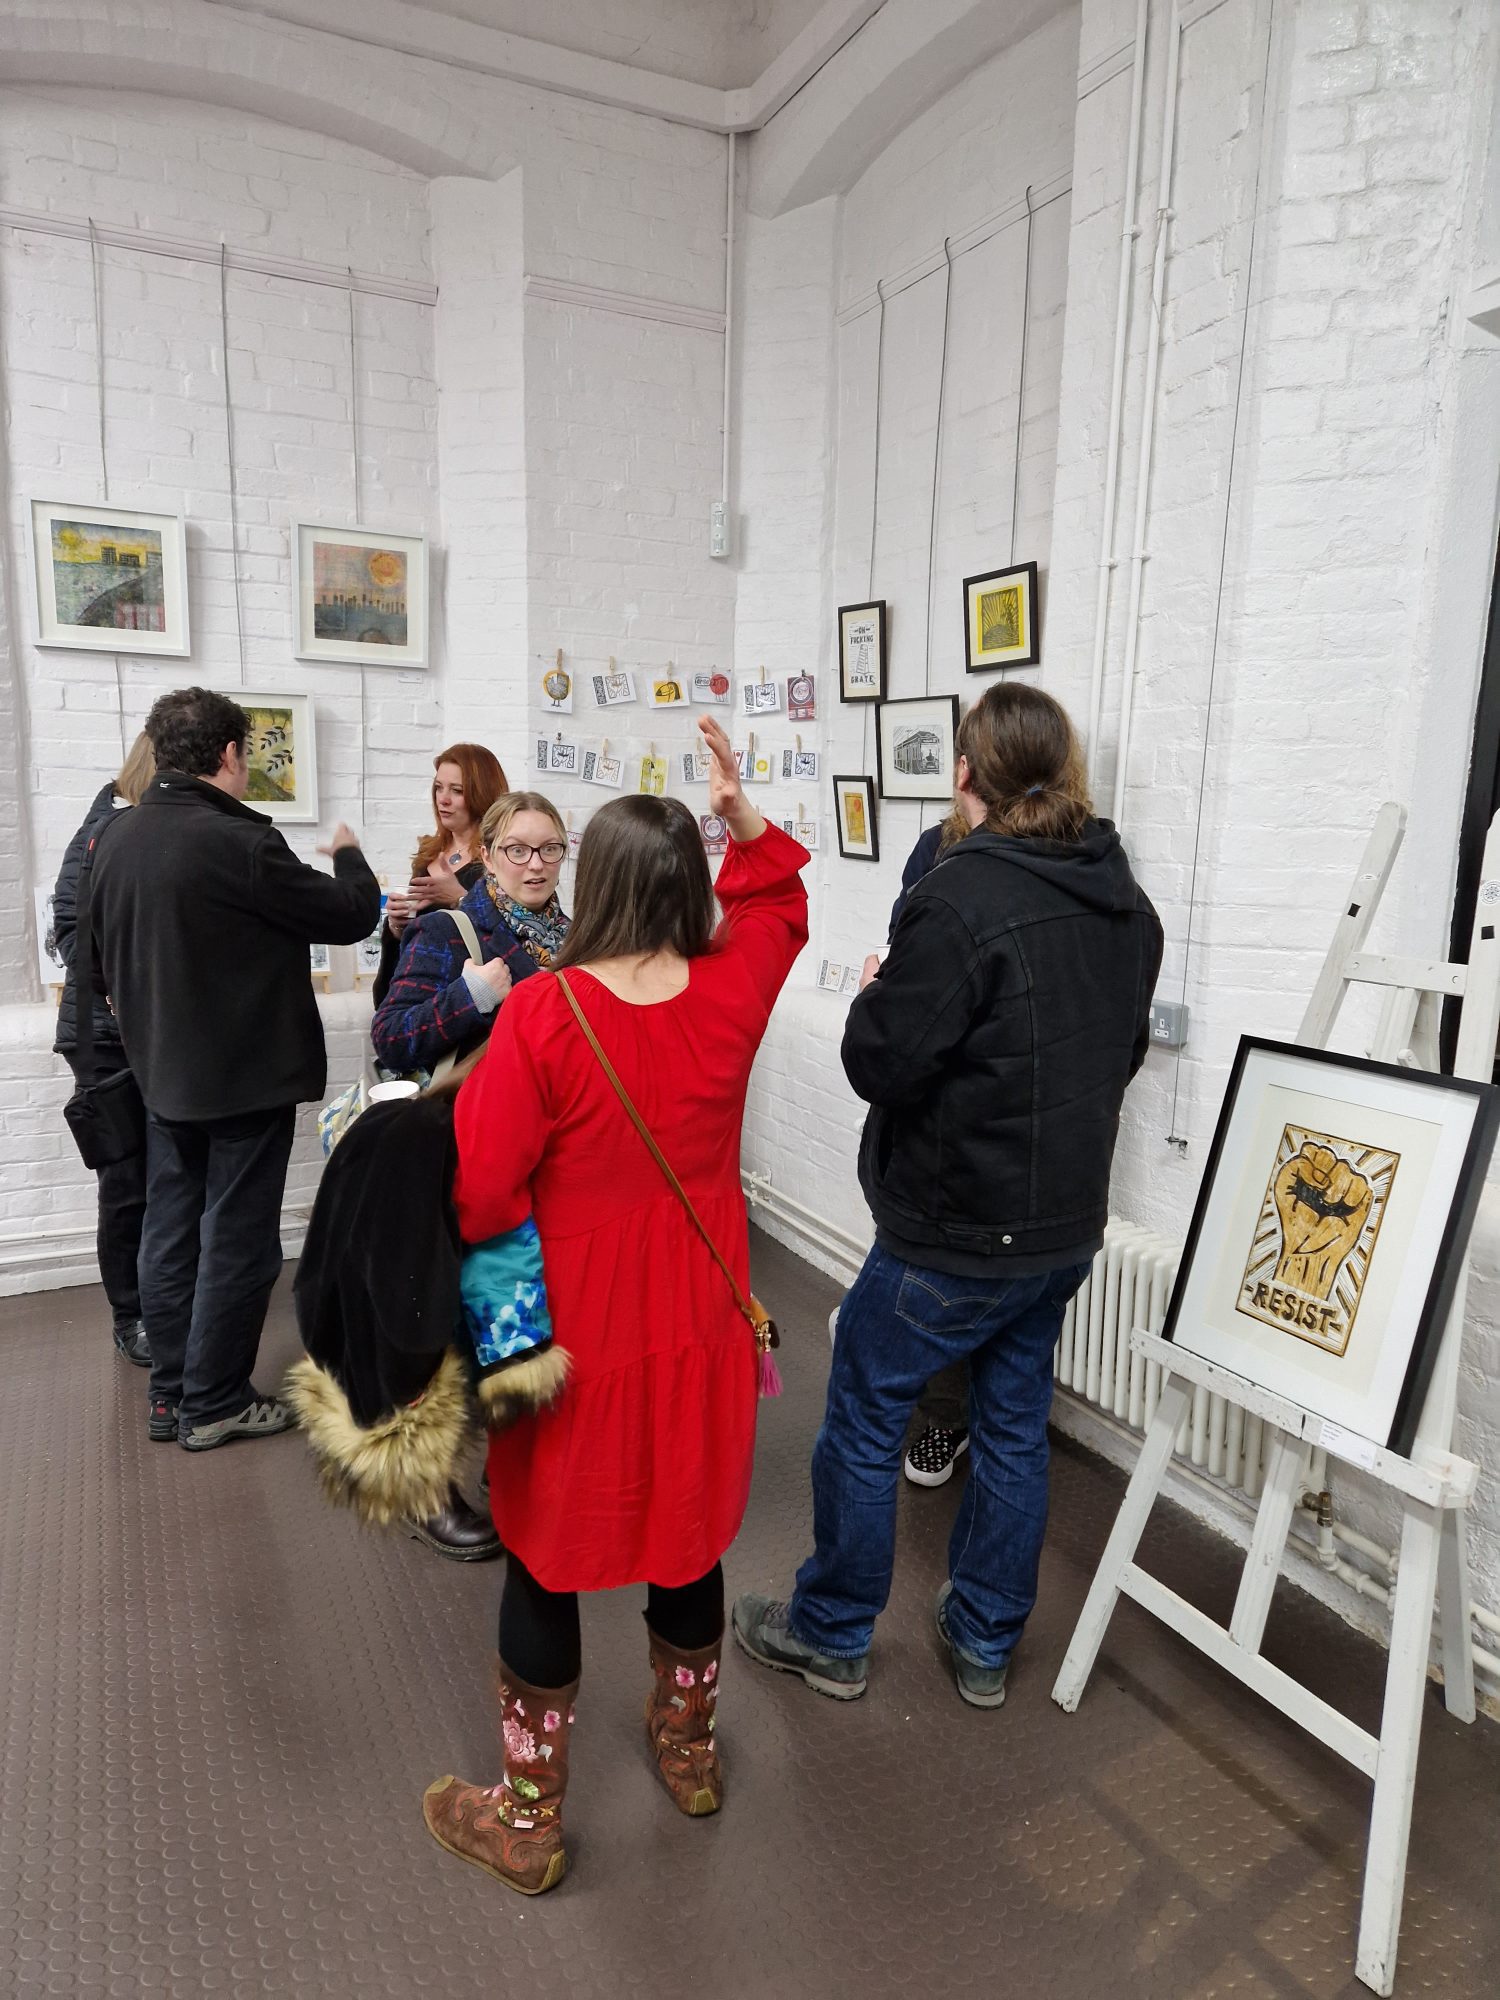 People attending an exhibition of linoprints by Dave Elsom